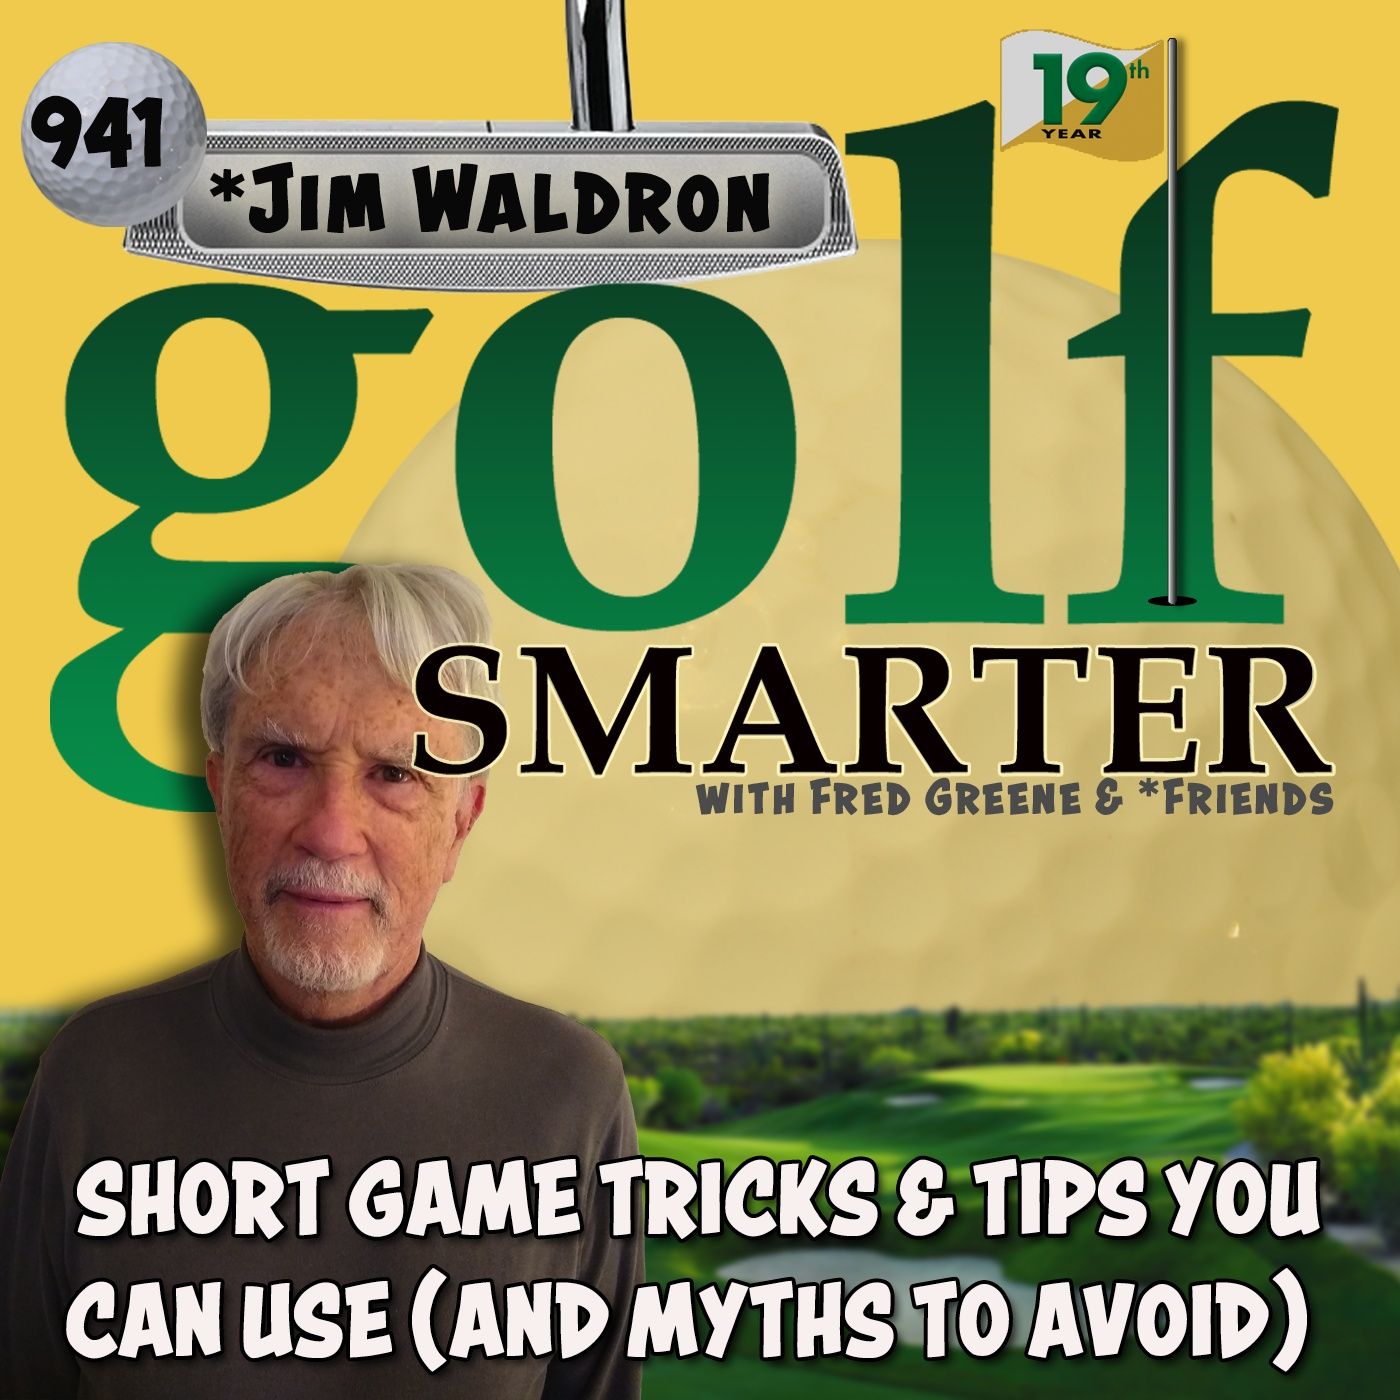 Short Game Tricks & Tips You Can Use (And Myths to Avoid) with Jim Waldron